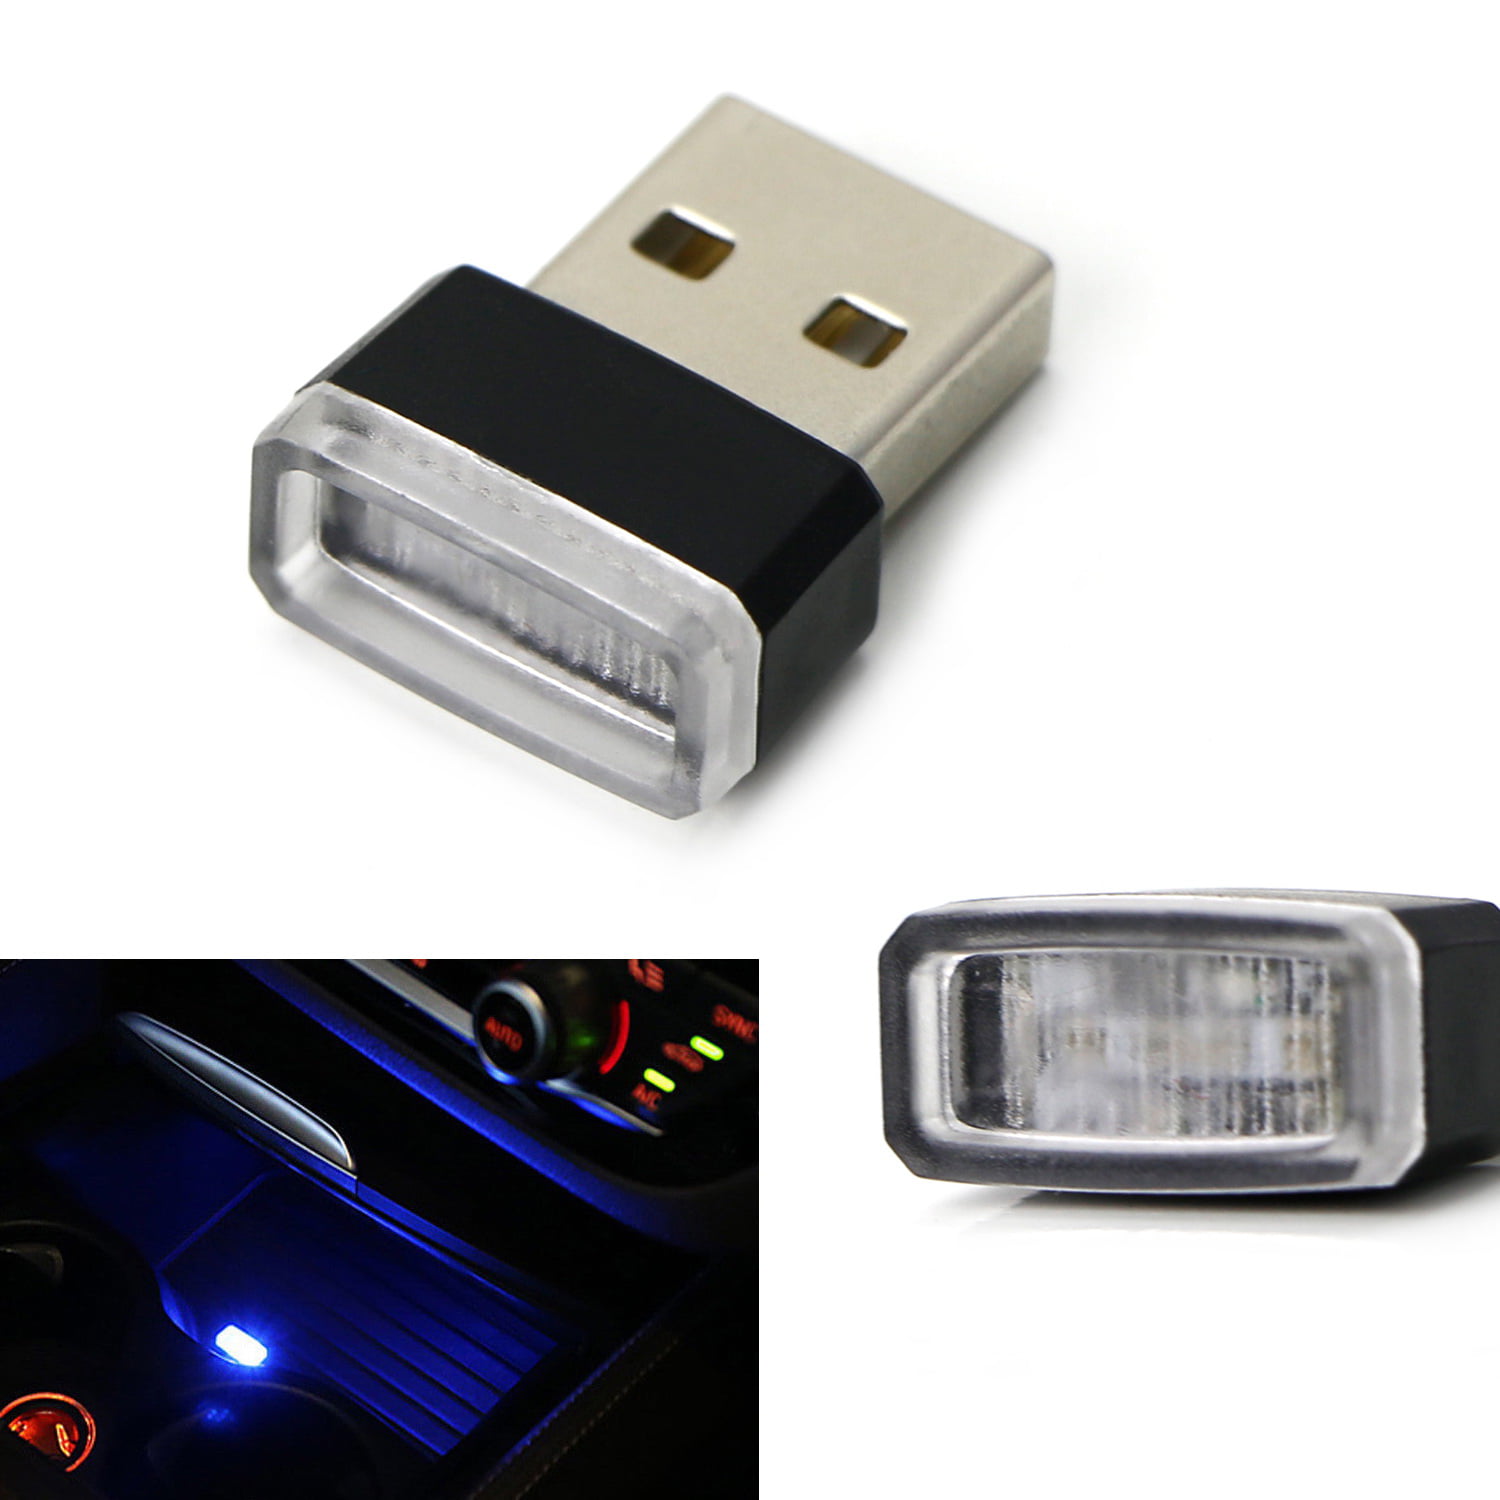 Rumfo 2Pcs USB LED Atmosphere Light Car Interior Ambient Lamp for All Automotive Night Decorative Lighting Yellow